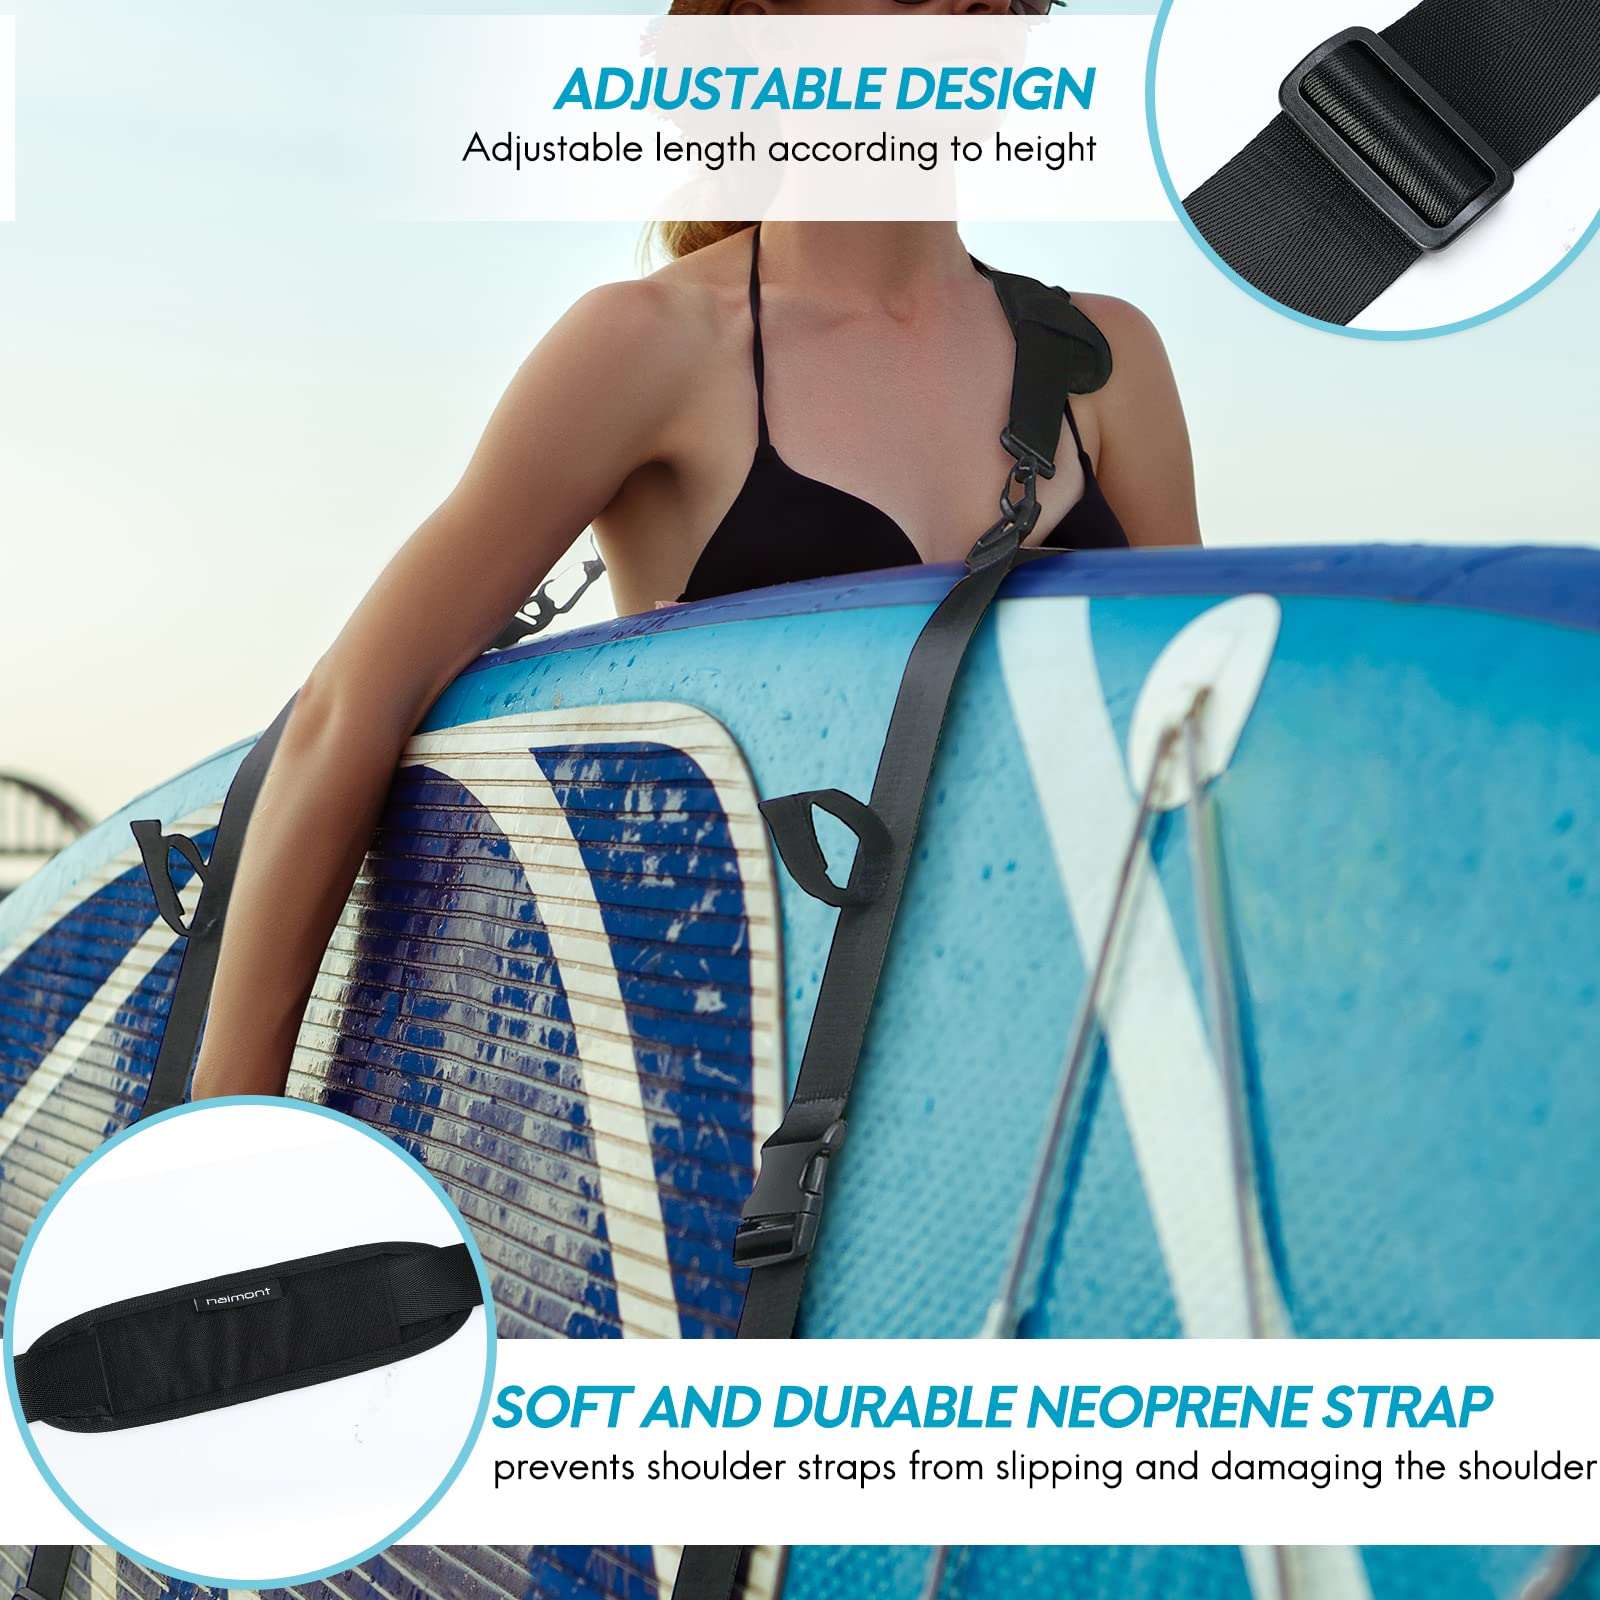 Adjustable Heavy-Duty SUP Paddle Board Carry Strap